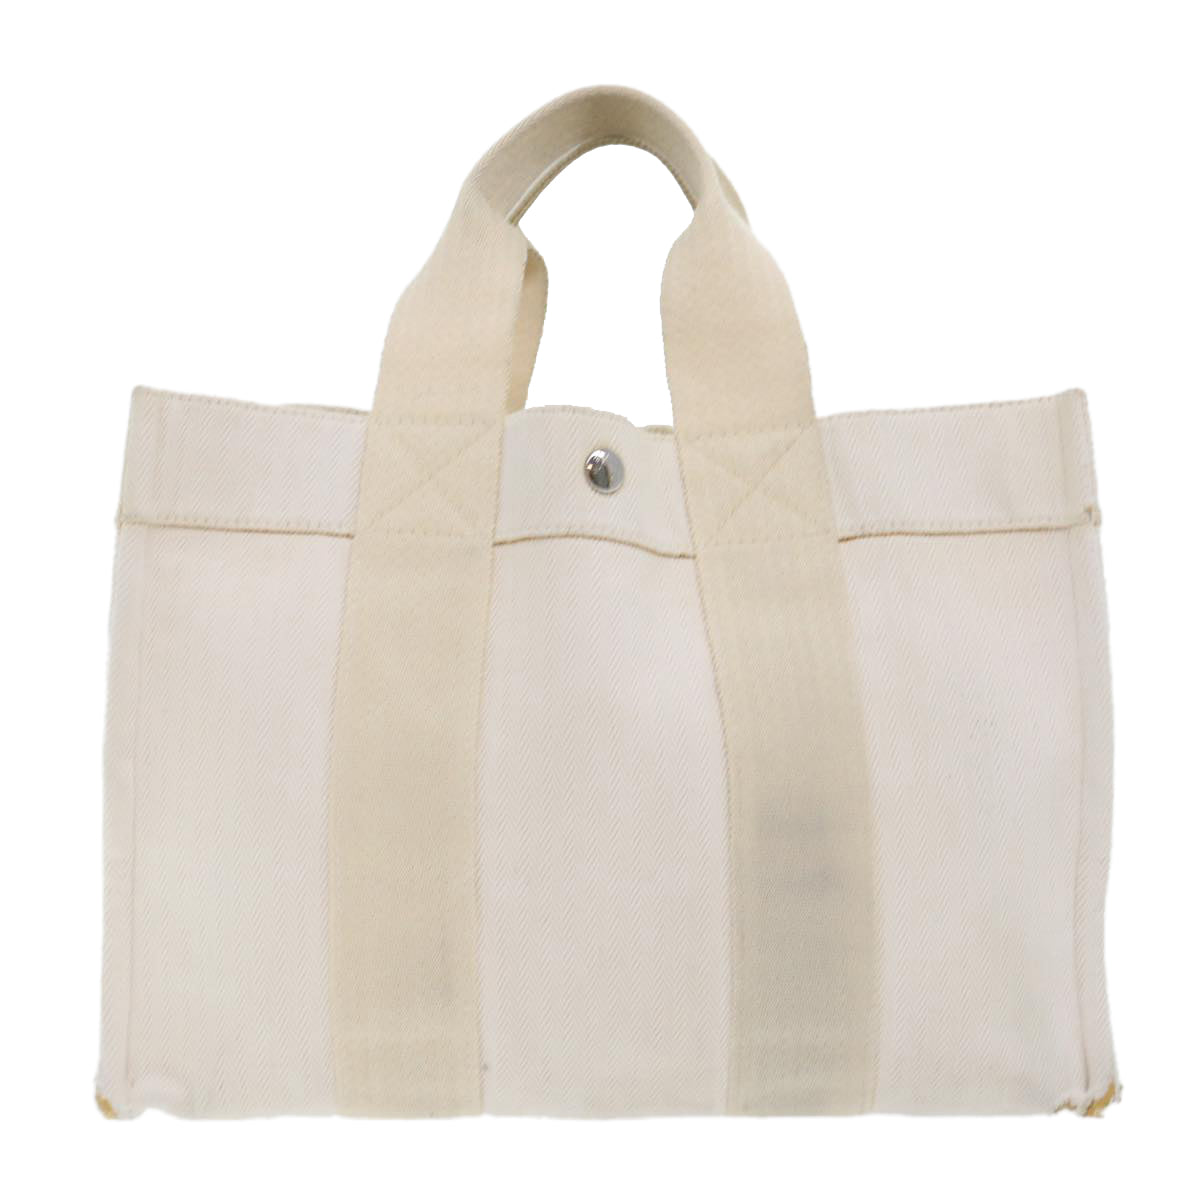 HERMES Cannes PM Tote Bag cotton White Cream Auth 51874 - 0